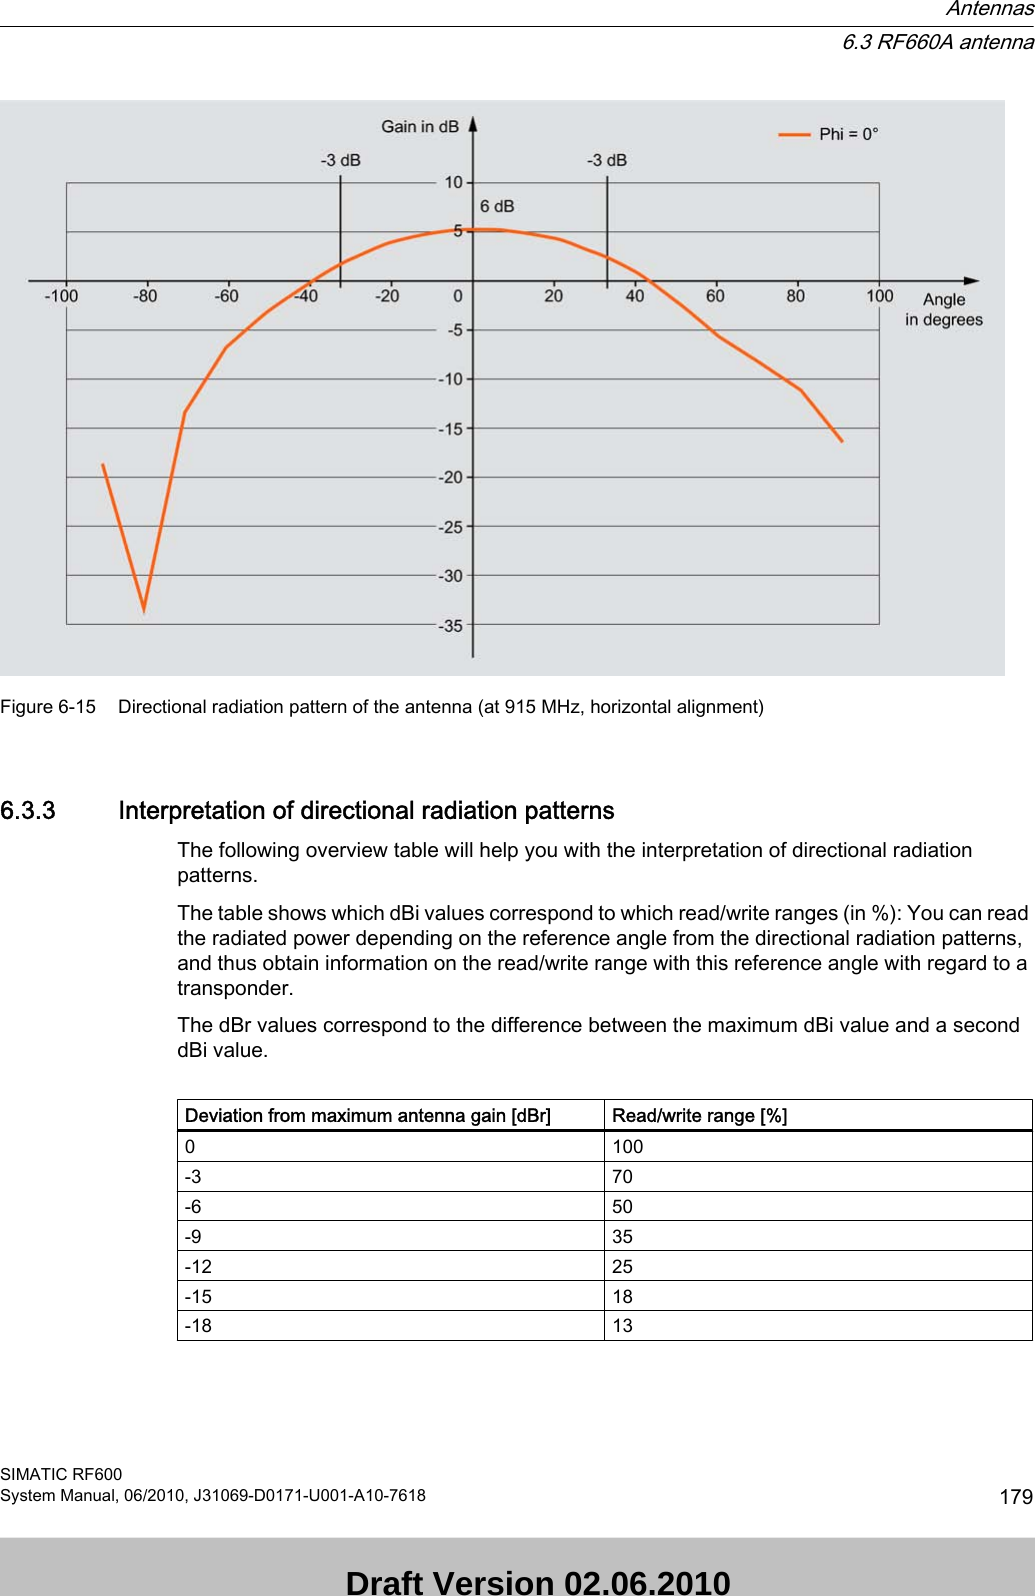 Figure 6-15 Directional radiation pattern of the antenna (at 915 MHz, horizontal alignment)6.3.3 Interpretation of directional radiation patternsThe following overview table will help you with the interpretation of directional radiation patterns. The table shows which dBi values correspond to which read/write ranges (in %): You can read the radiated power depending on the reference angle from the directional radiation patterns, and thus obtain information on the read/write range with this reference angle with regard to a transponder.The dBr values correspond to the difference between the maximum dBi value and a second dBi value.Deviation from maximum antenna gain [dBr] Read/write range [%]0100-3 70-6 50-9 35-12 25-15 18-18 13Antennas6.3 RF660A antennaSIMATIC RF600System Manual, 06/2010, J31069-D0171-U001-A10-7618 179 Draft Version 02.06.2010 